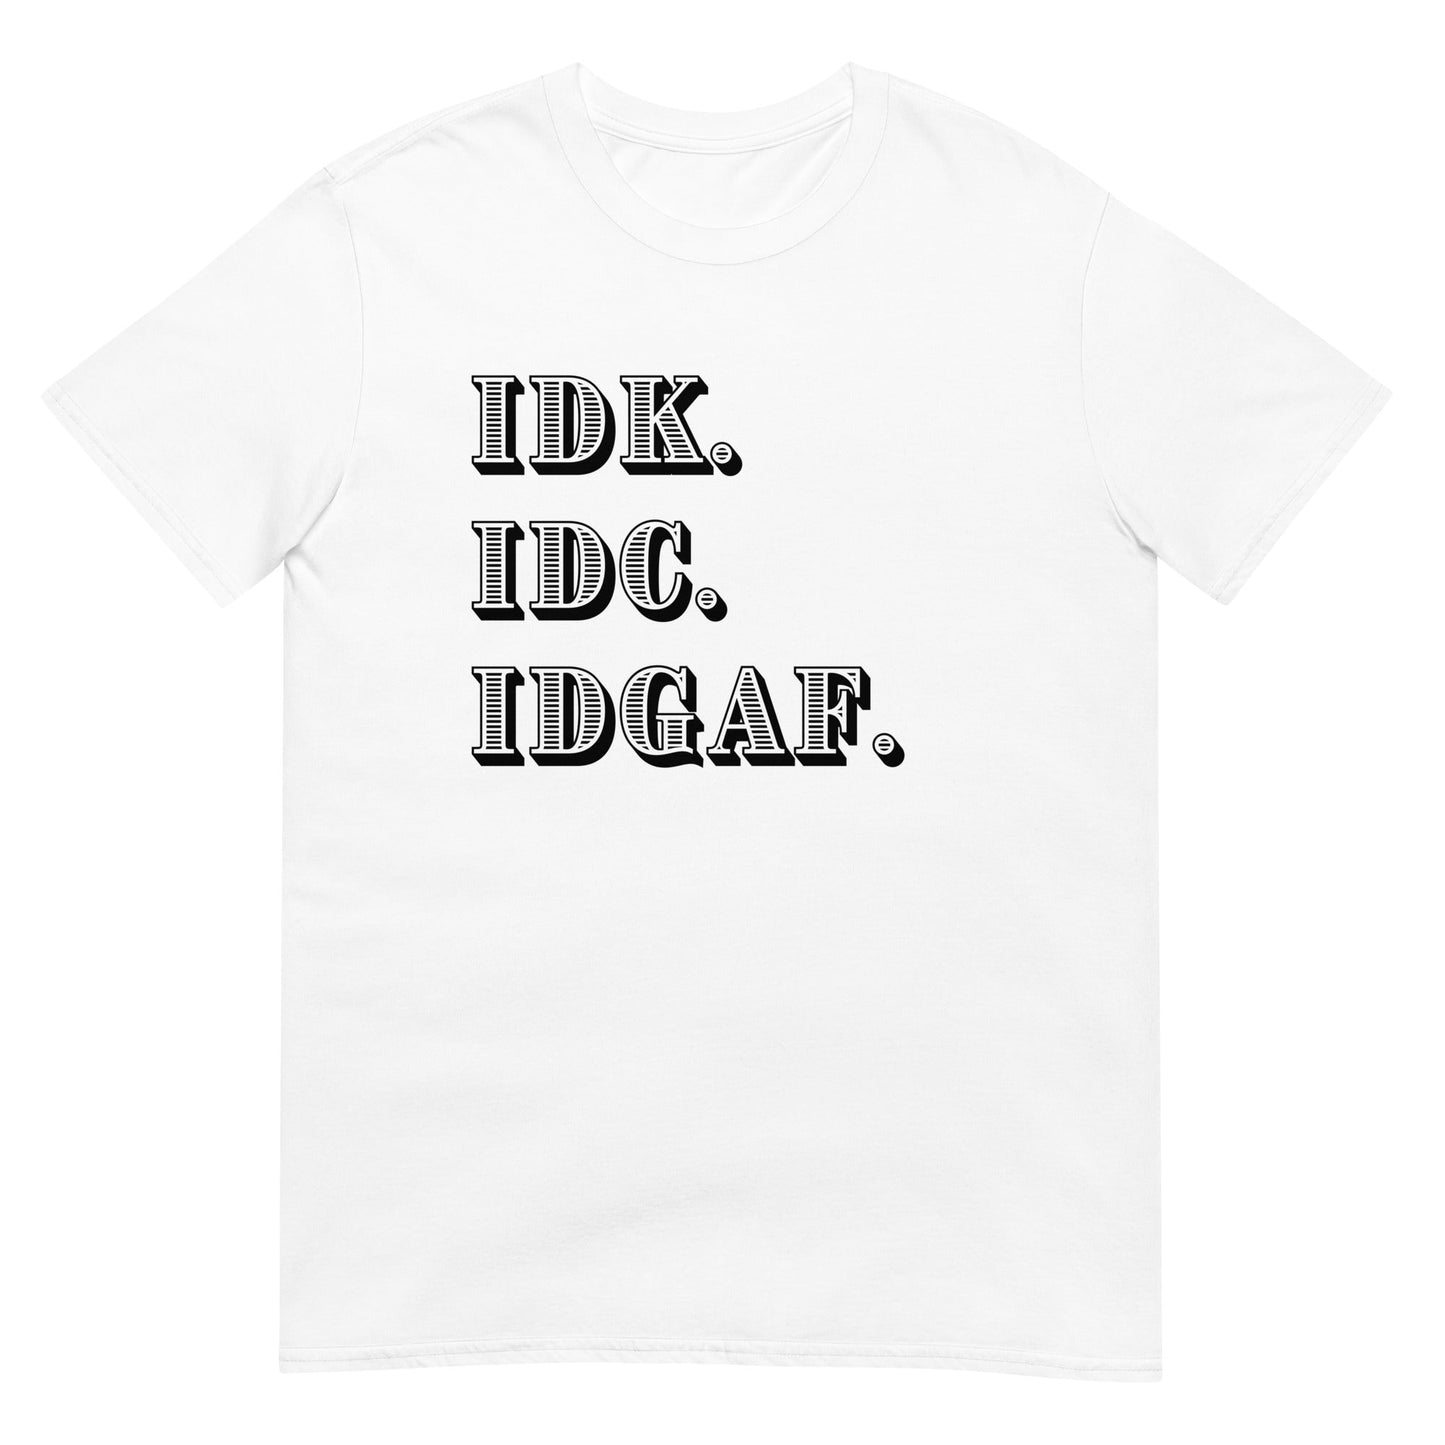 iDK. IDC. IDGAF Short-Sleeve Unisex T-Shirt (For a Slim Fit Order a Size Down) - Catch This Tea Shirts